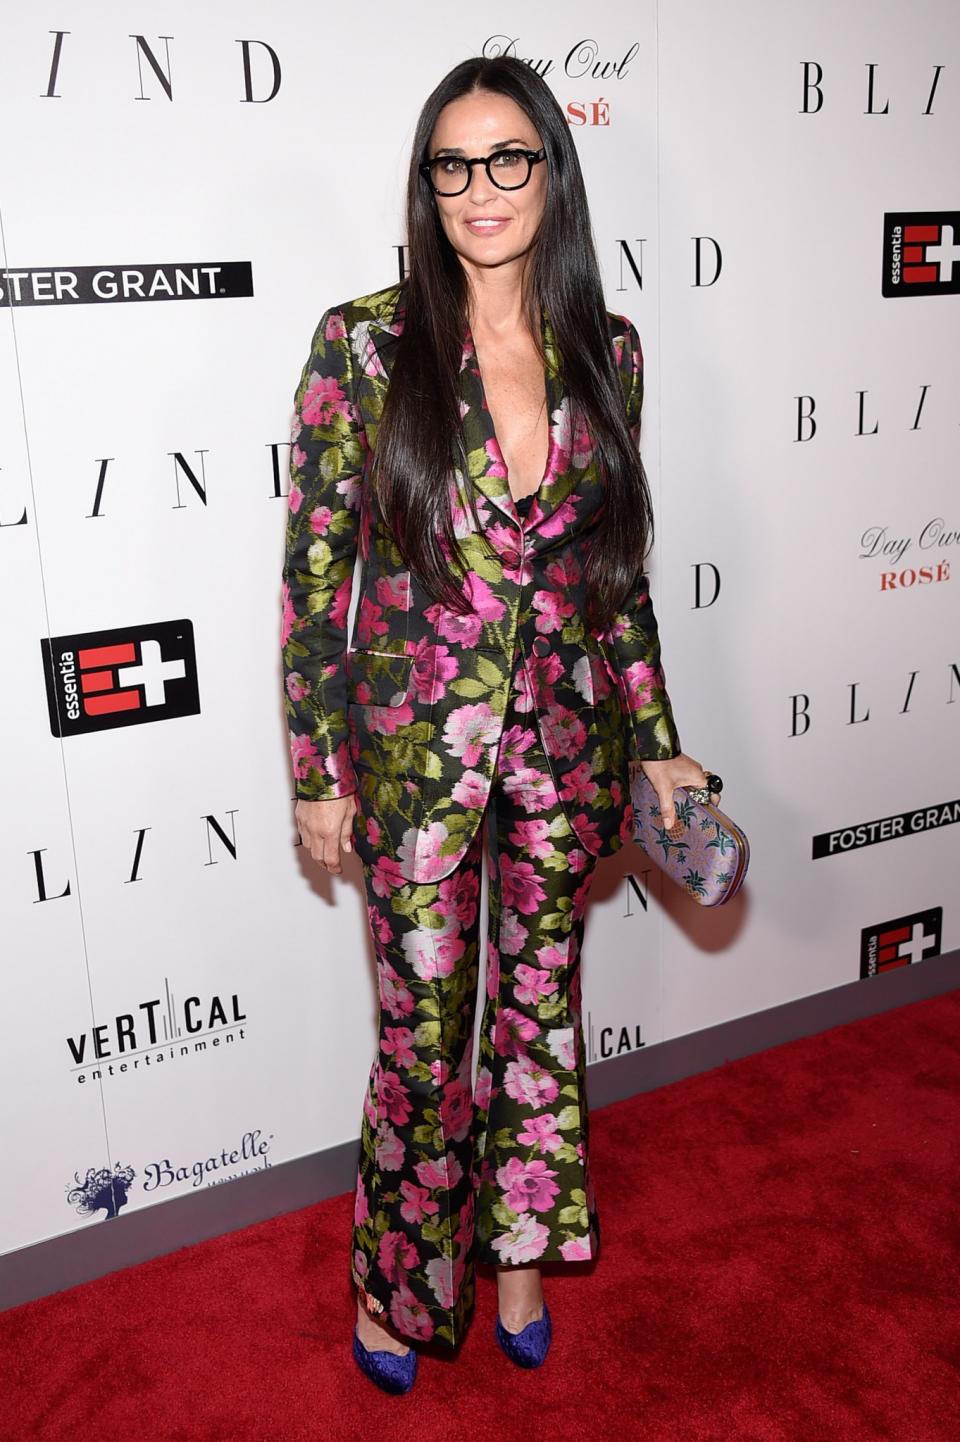 MISS: Demi Moore at the Blind premiere